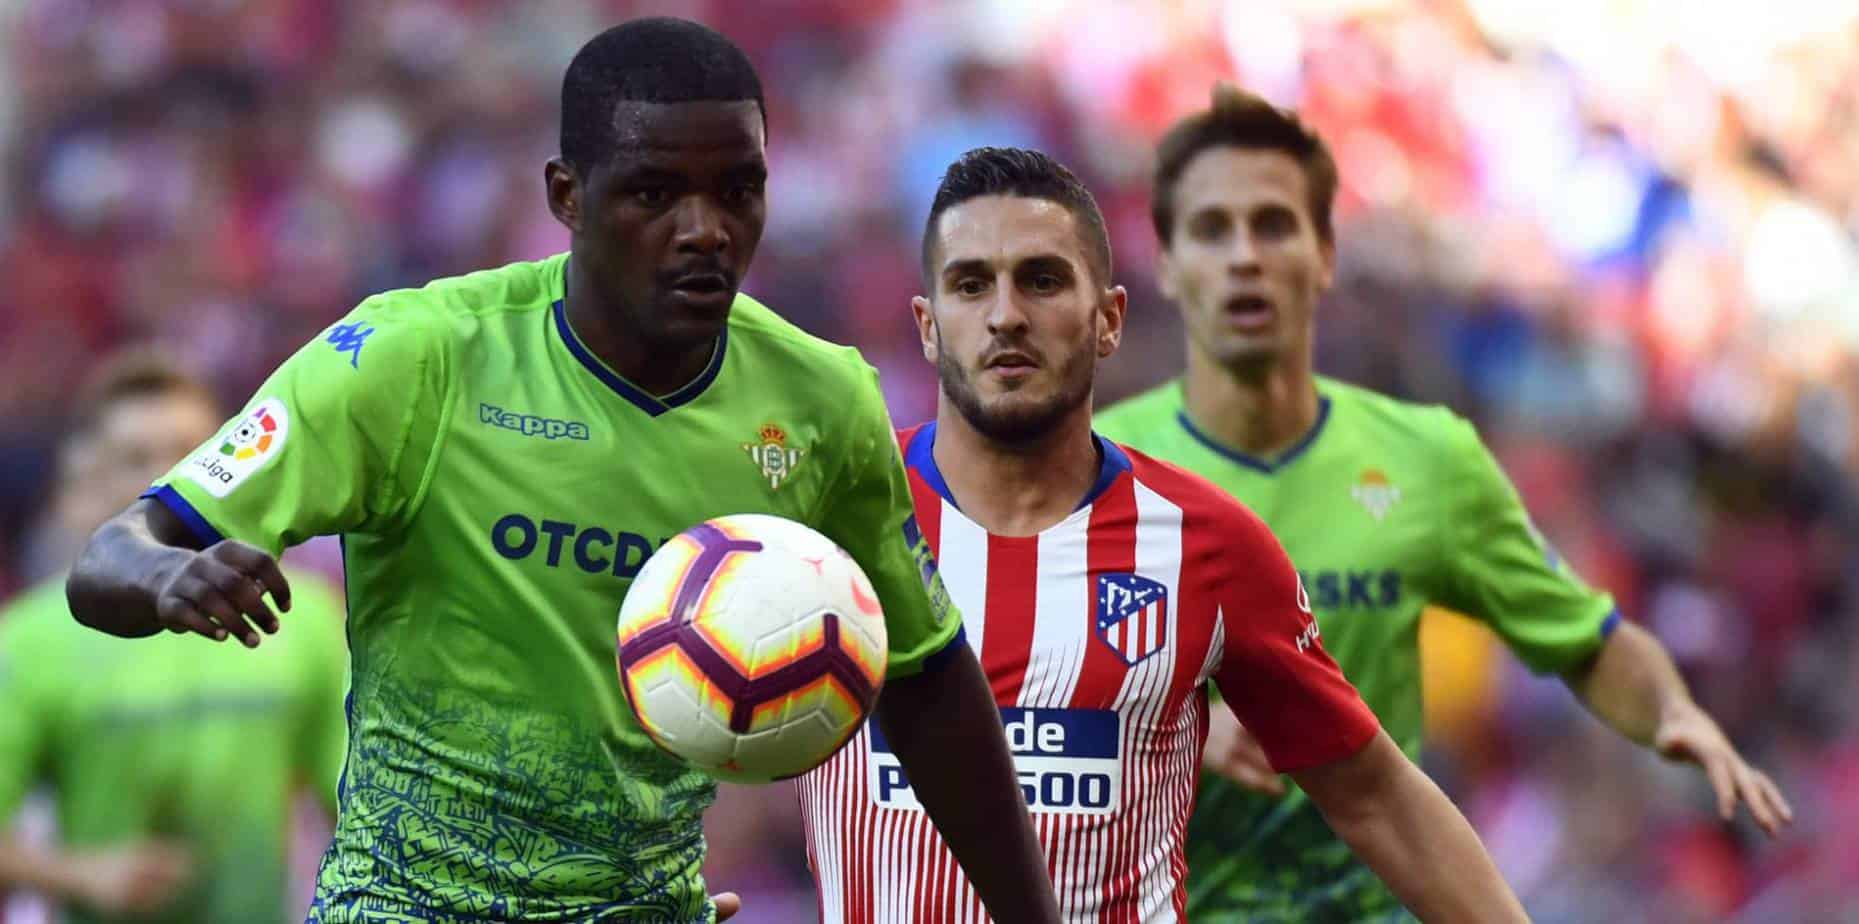 Atlético Madrid vs. Betis – Betting Odds and Free Pick